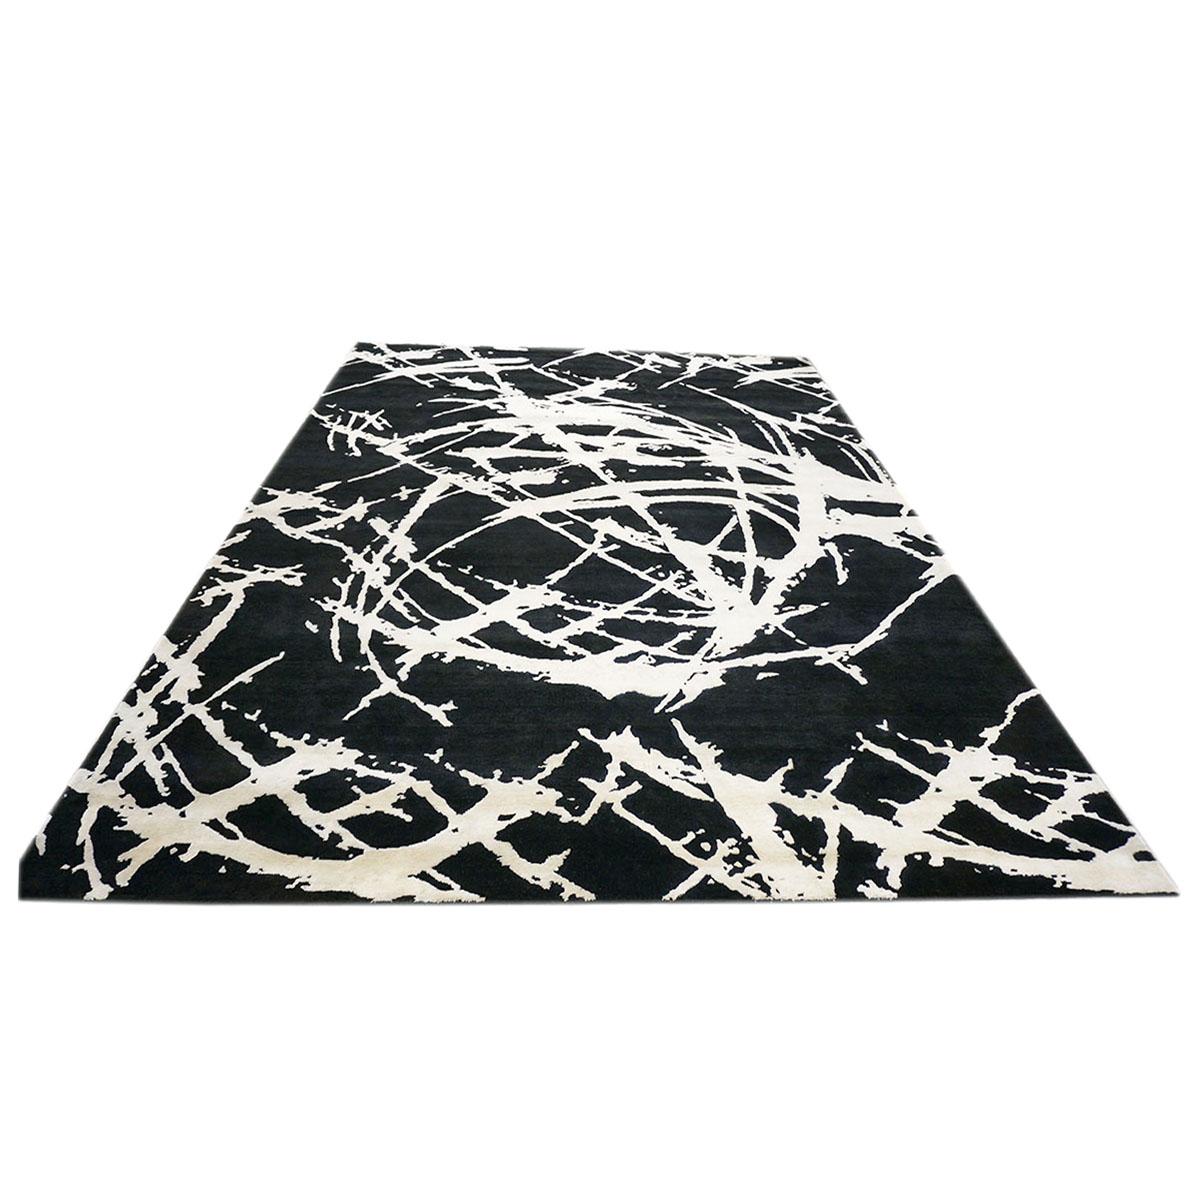 Ashly fine rugs presents a new modern inspired wool & silk 9x12 black & white handmade area rug with lustrous shiny fibers and a thick durable pile. This gorgeous collection has been designed by our in-house designer and handmade by the skilled